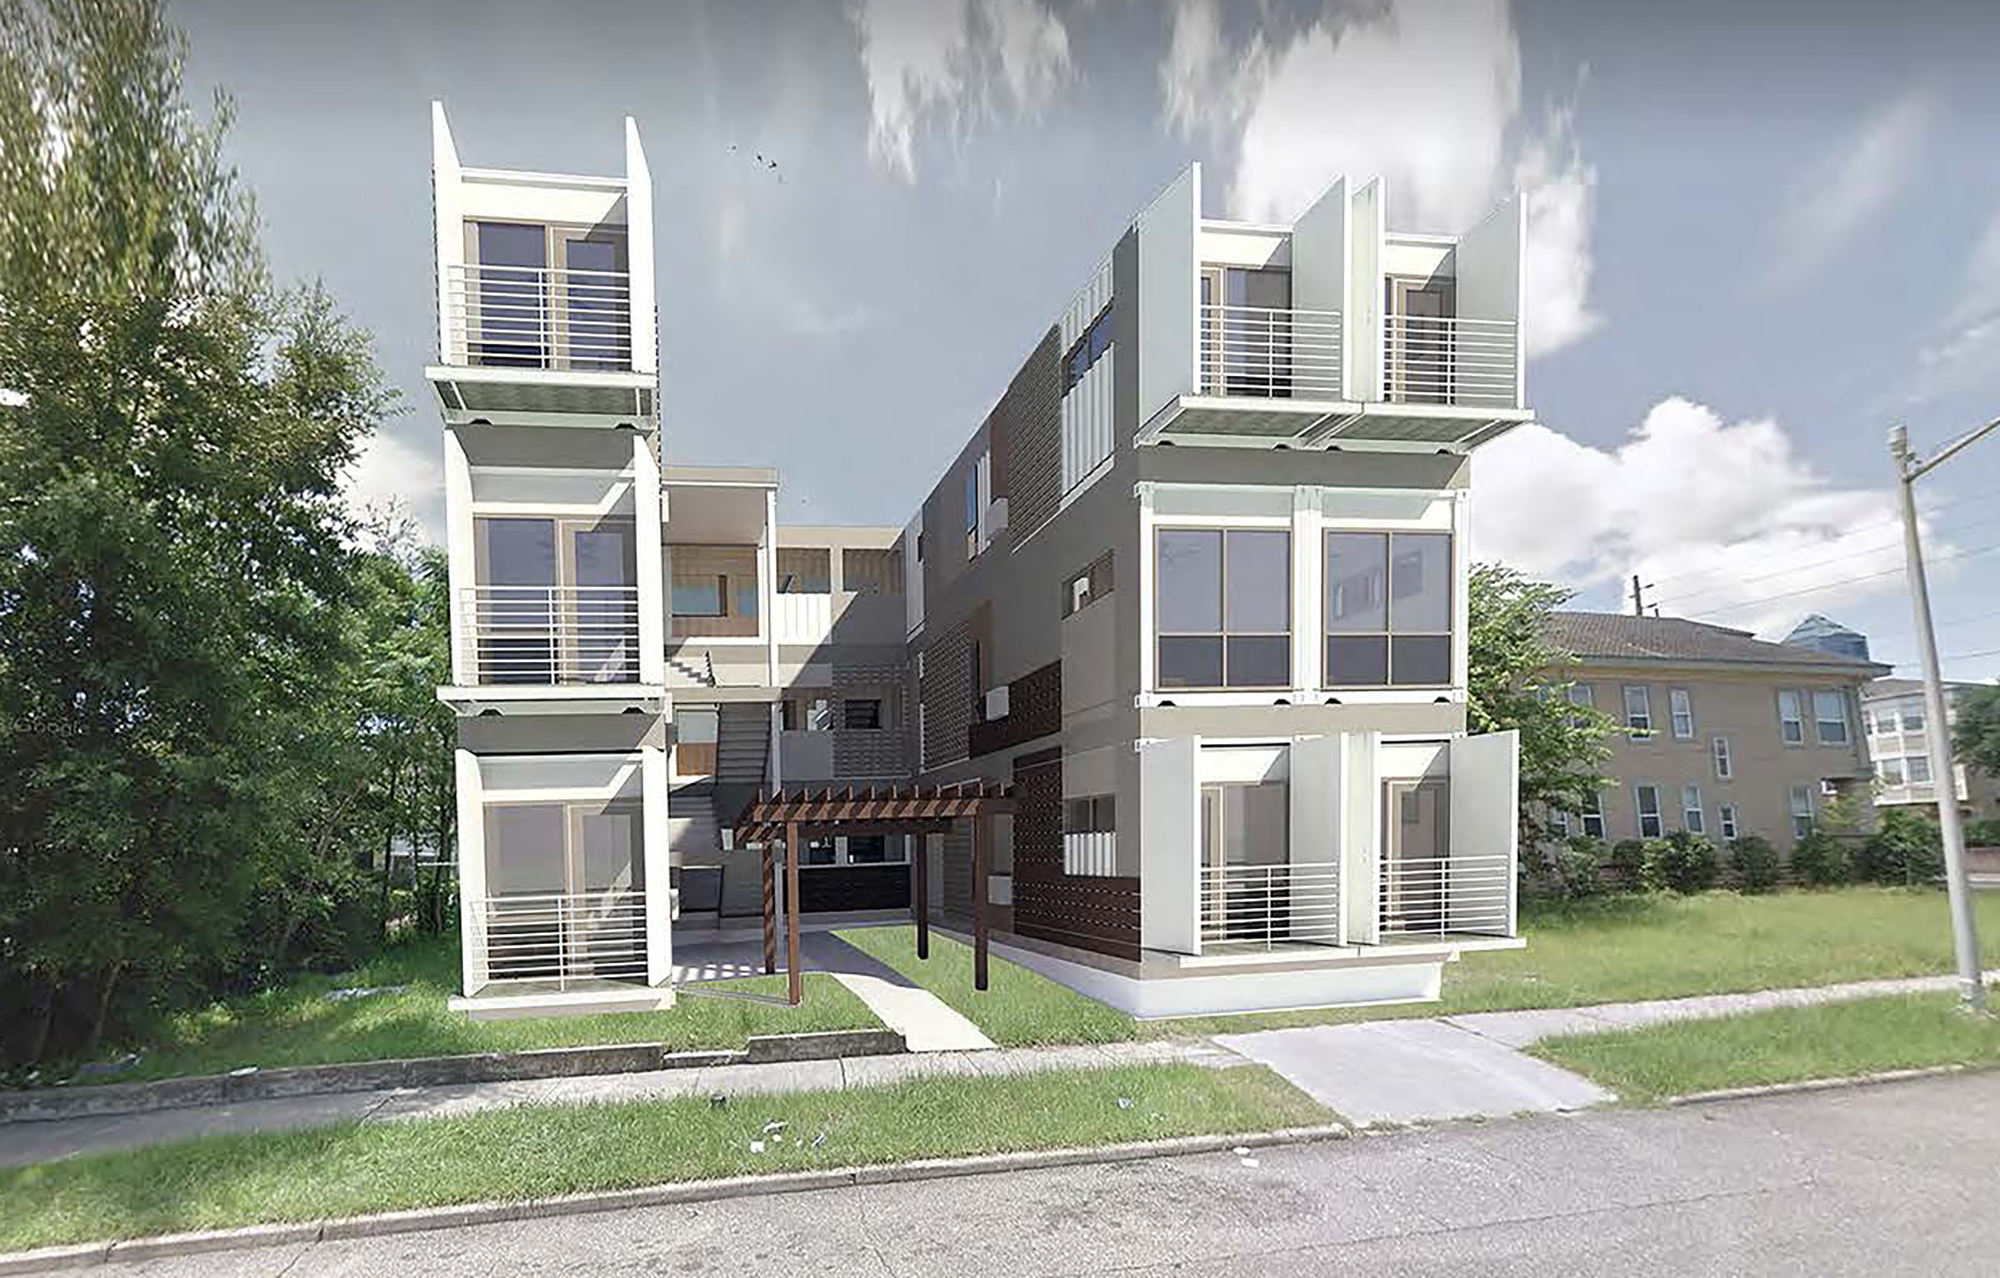 An artist’s rendering of the completed Ashley Street Container Lofts. The project is planned for completion in the first quarter of 2021.